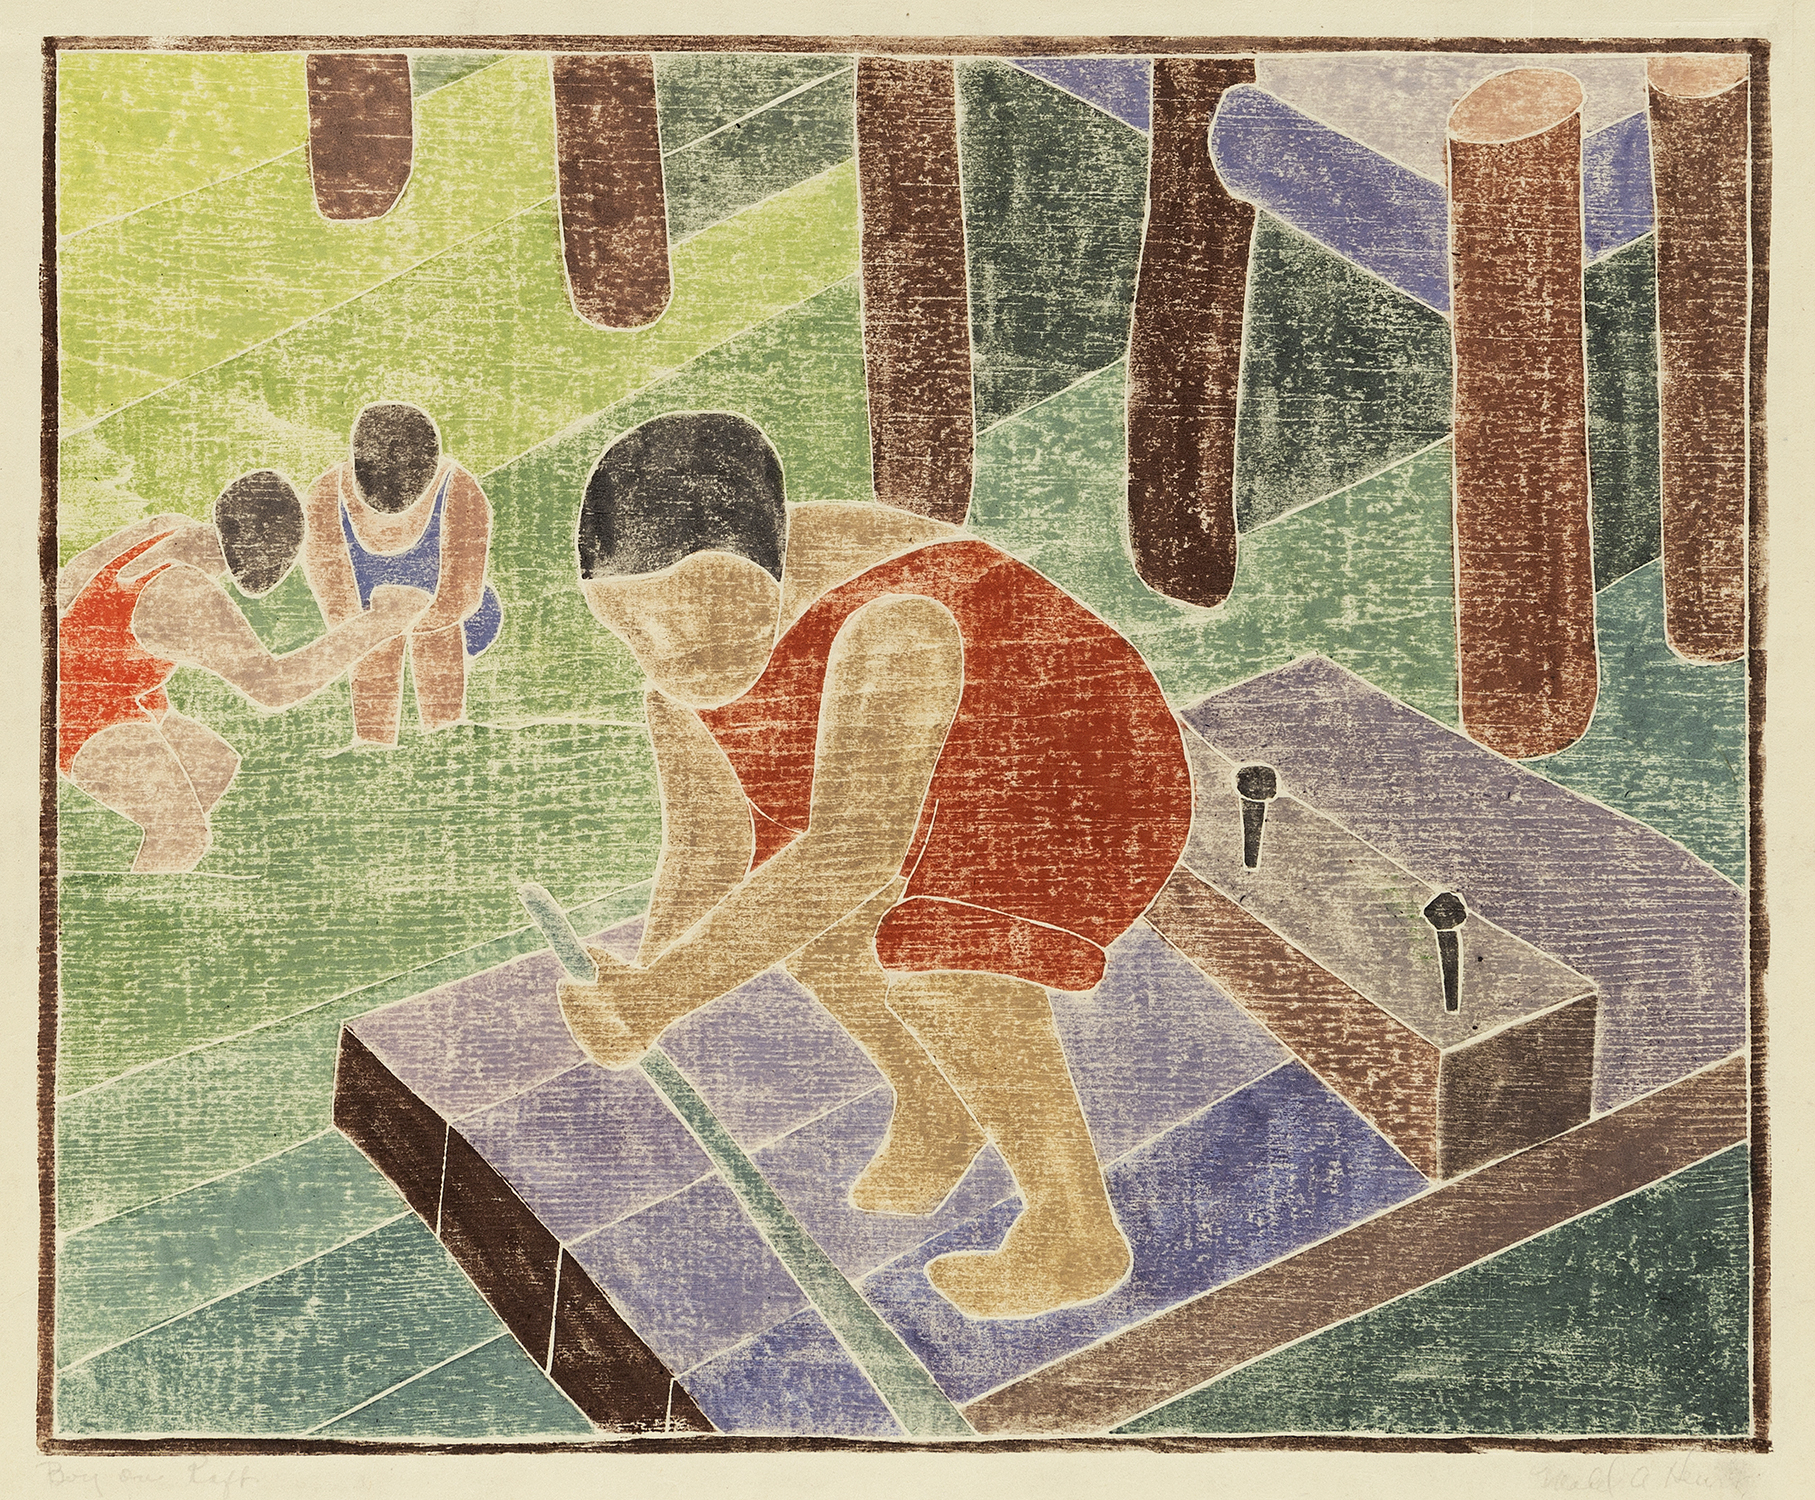 Boy on a Raft, 1933, White line woodcut, 14 1/2 x 18 1/4 inches (36.8 x 46.4 cm), Edition size unknown, rare